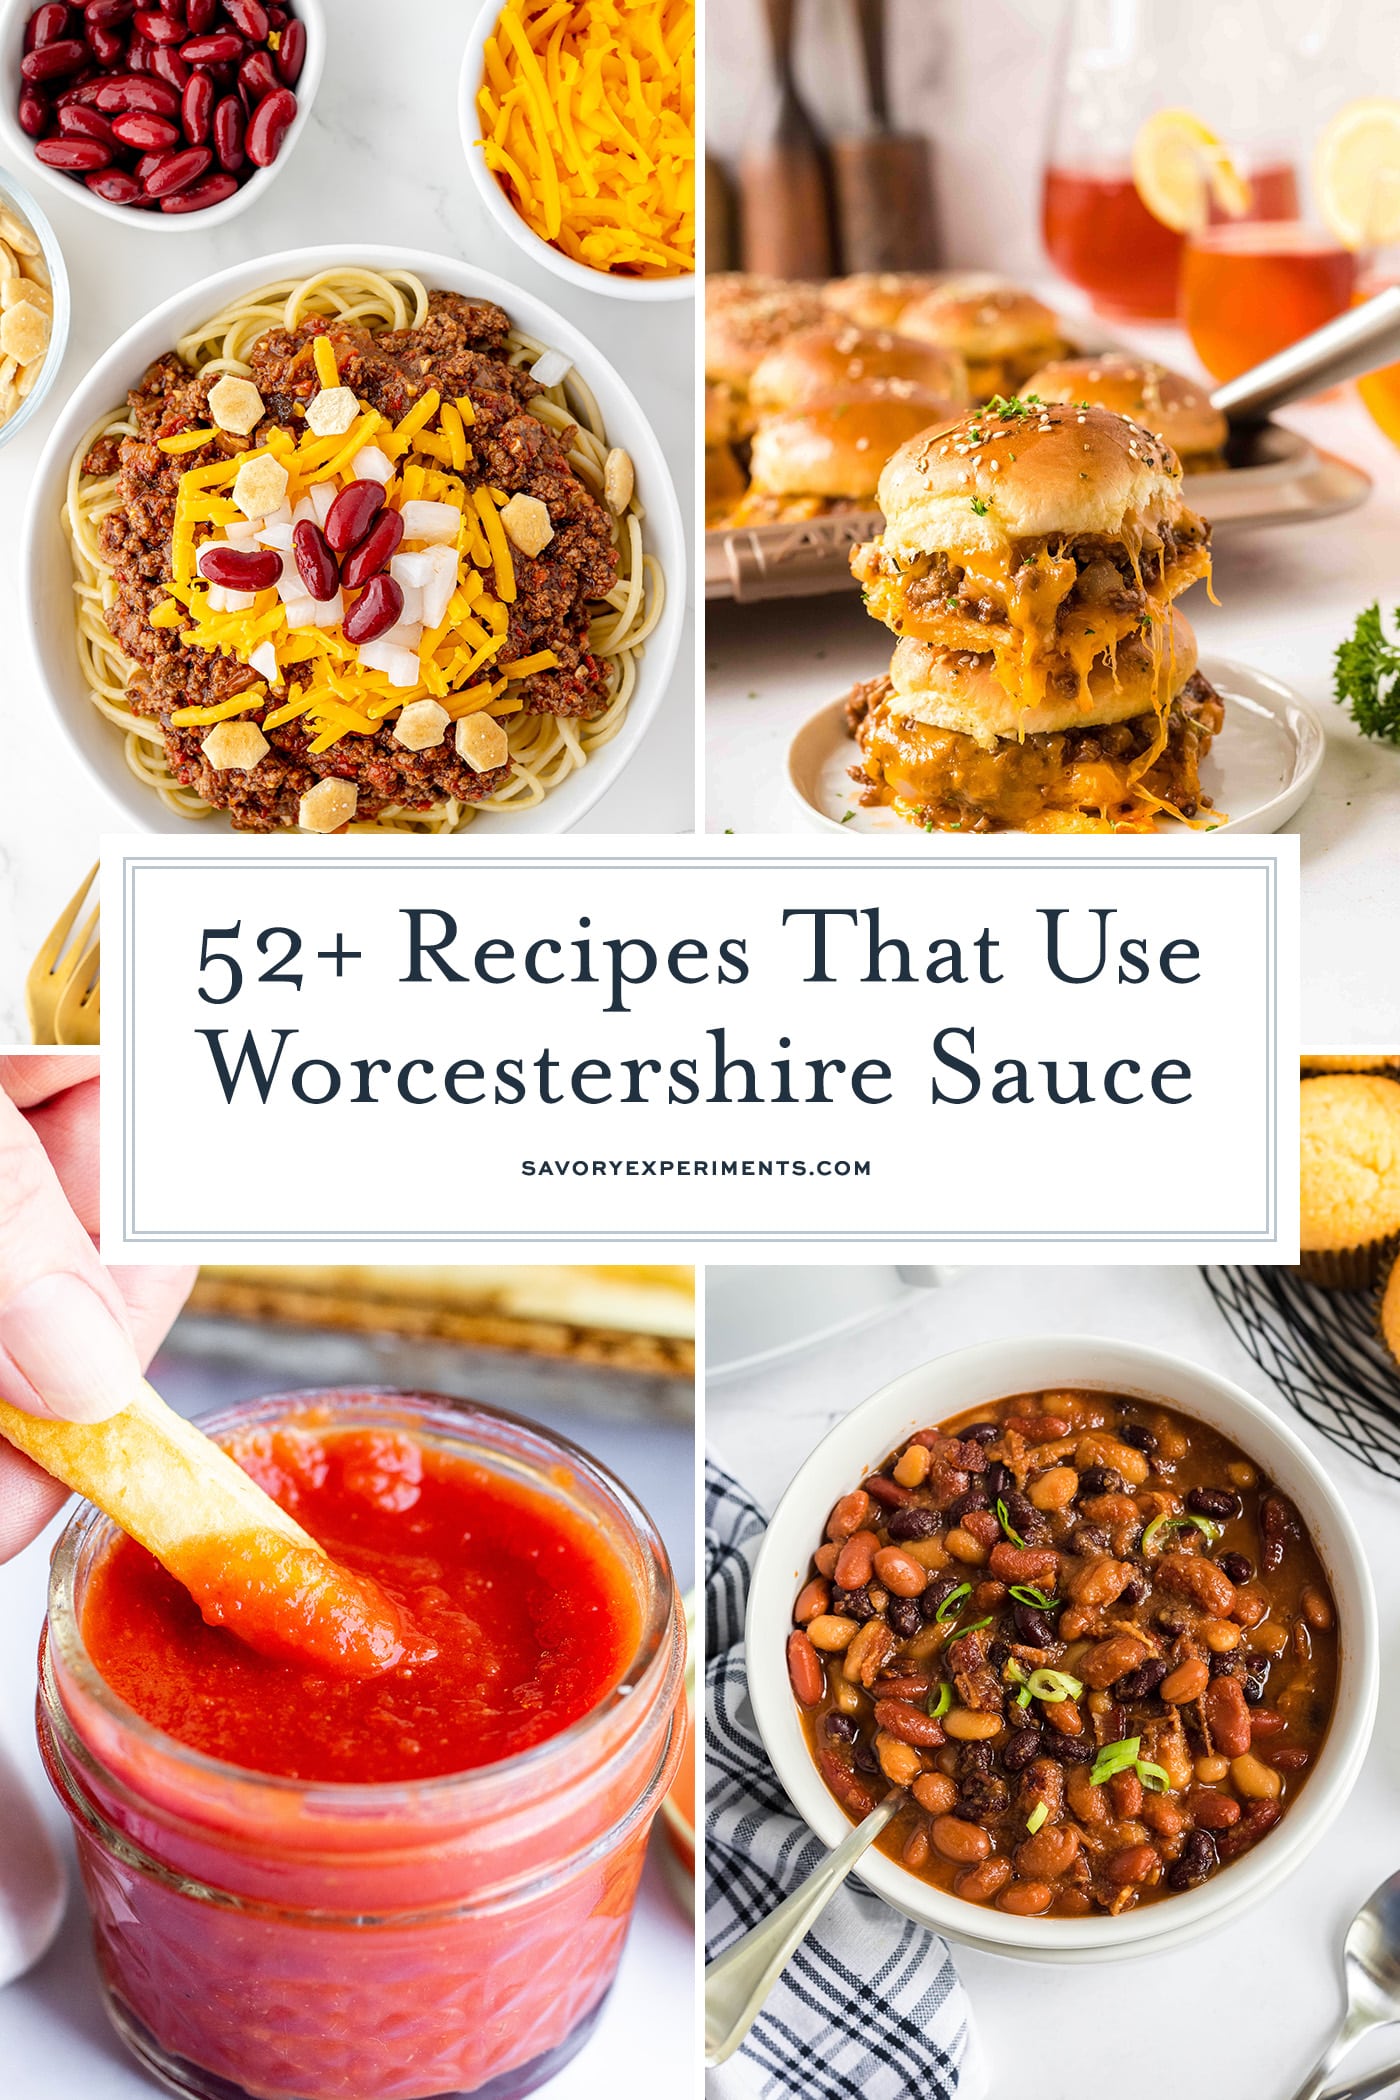 52+ BEST Recipes That Use Worcestershire Sauce